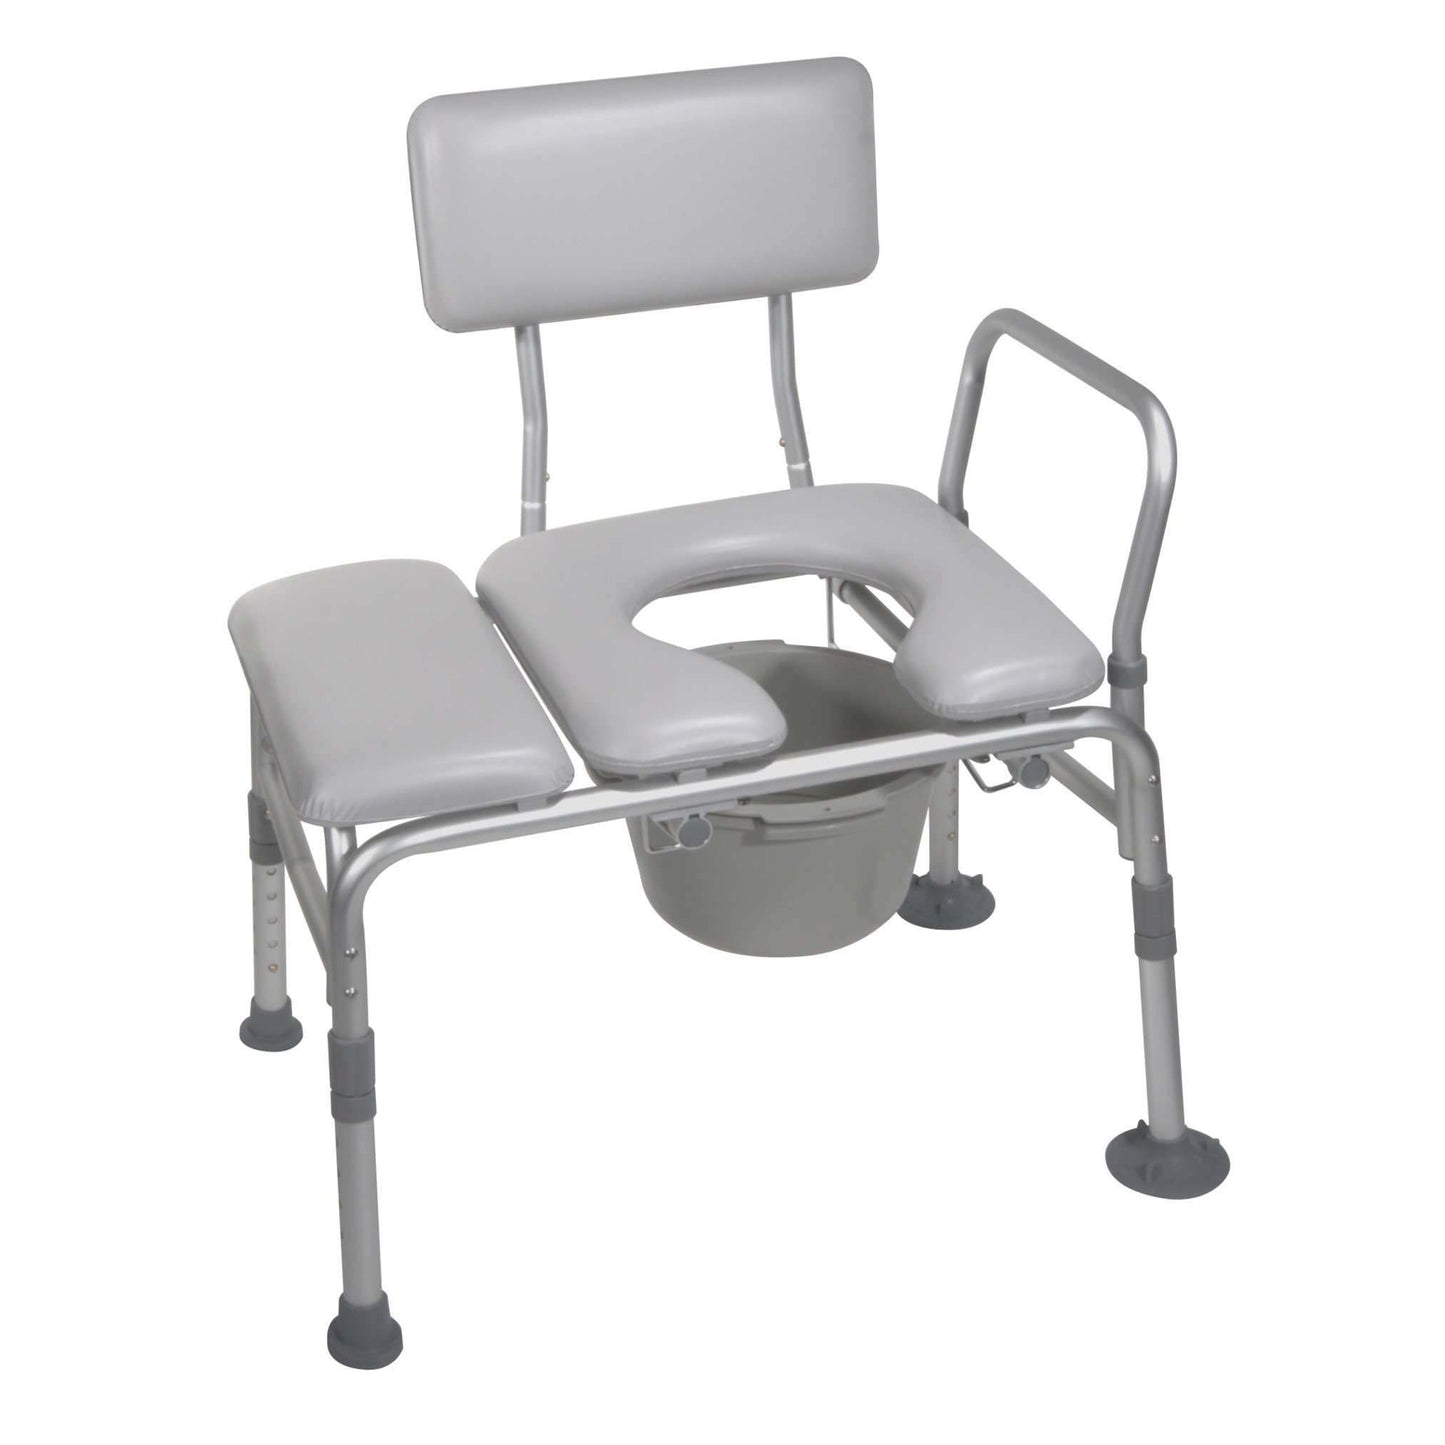 Drive 12005kdc-1 Padded Seat Transfer Bench with Commode Opening